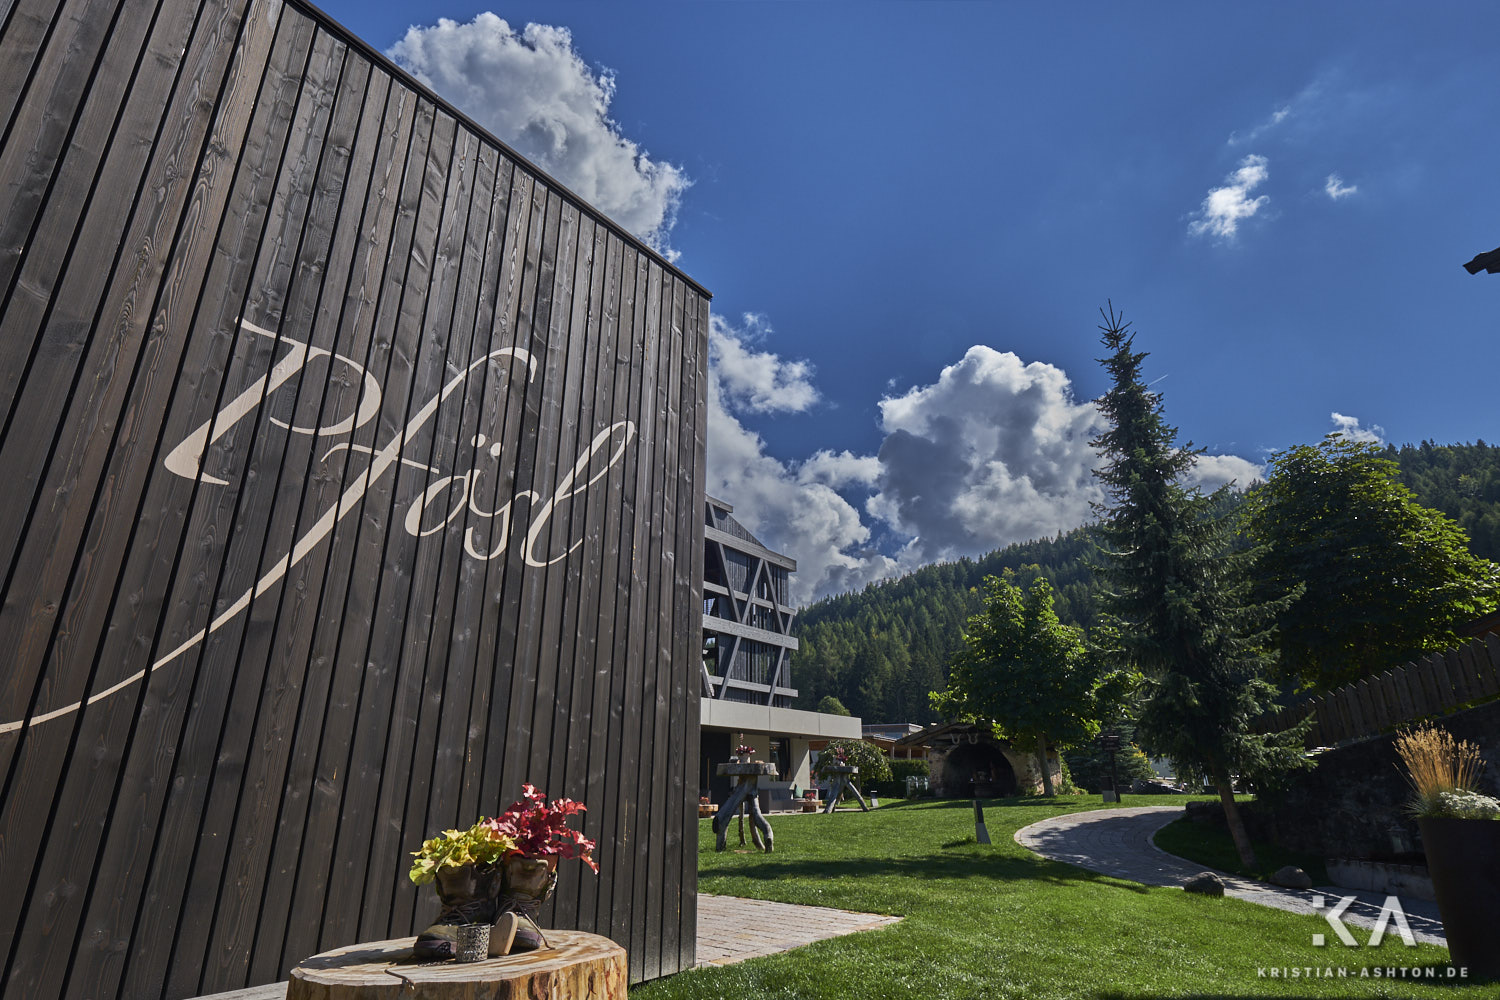 i bin a Pfösl! - our absolute favourite hotel and second home